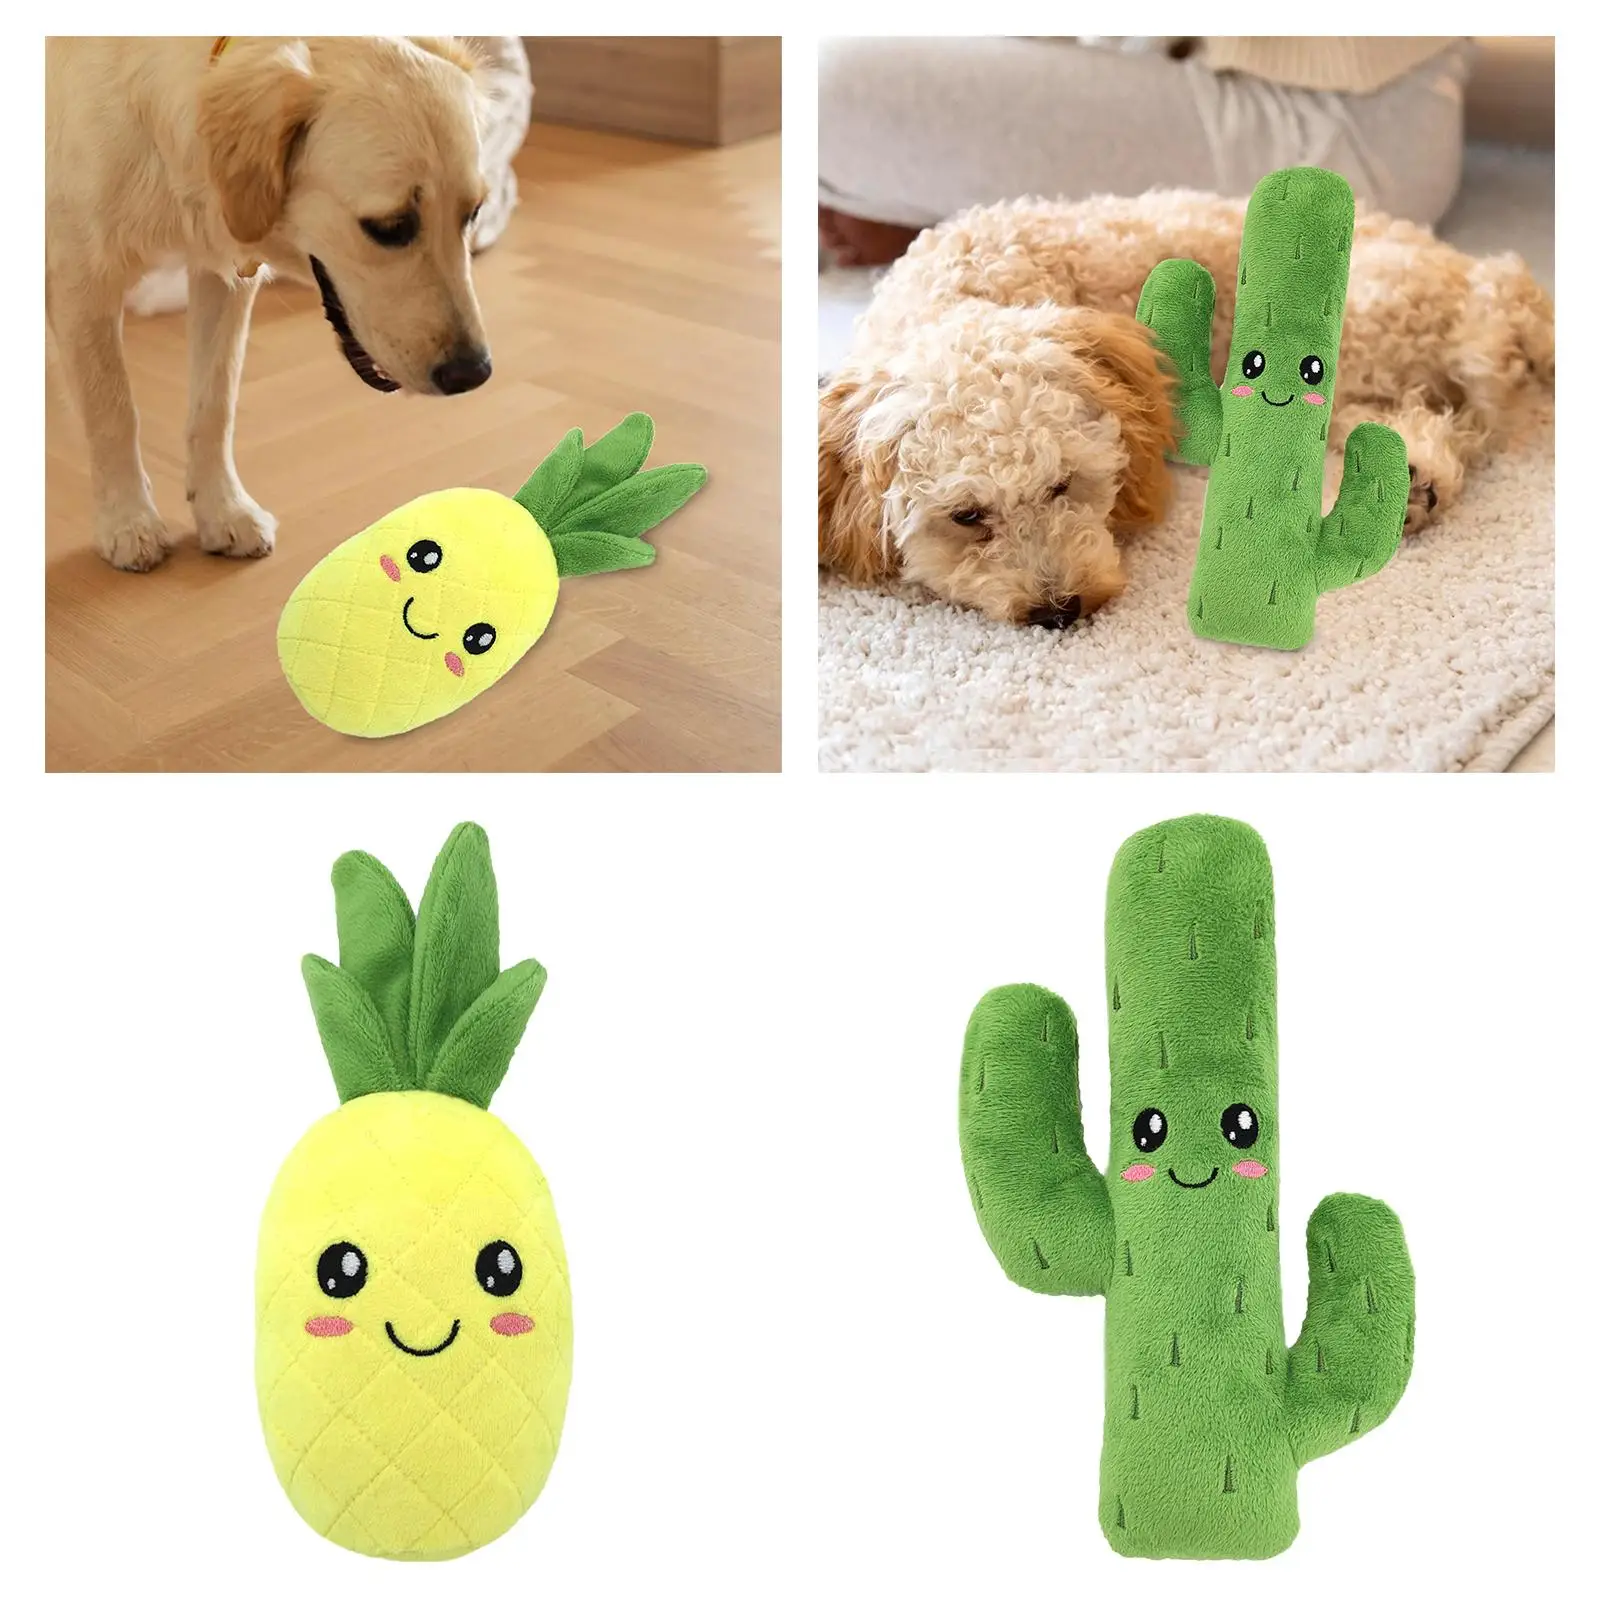 Squeaky Dog Toy Plush Chew Toy plush Toy Stuffed Plush Toy Sound Toy Cute Dog Toy with Squeaker for Small Medium Large Dogs